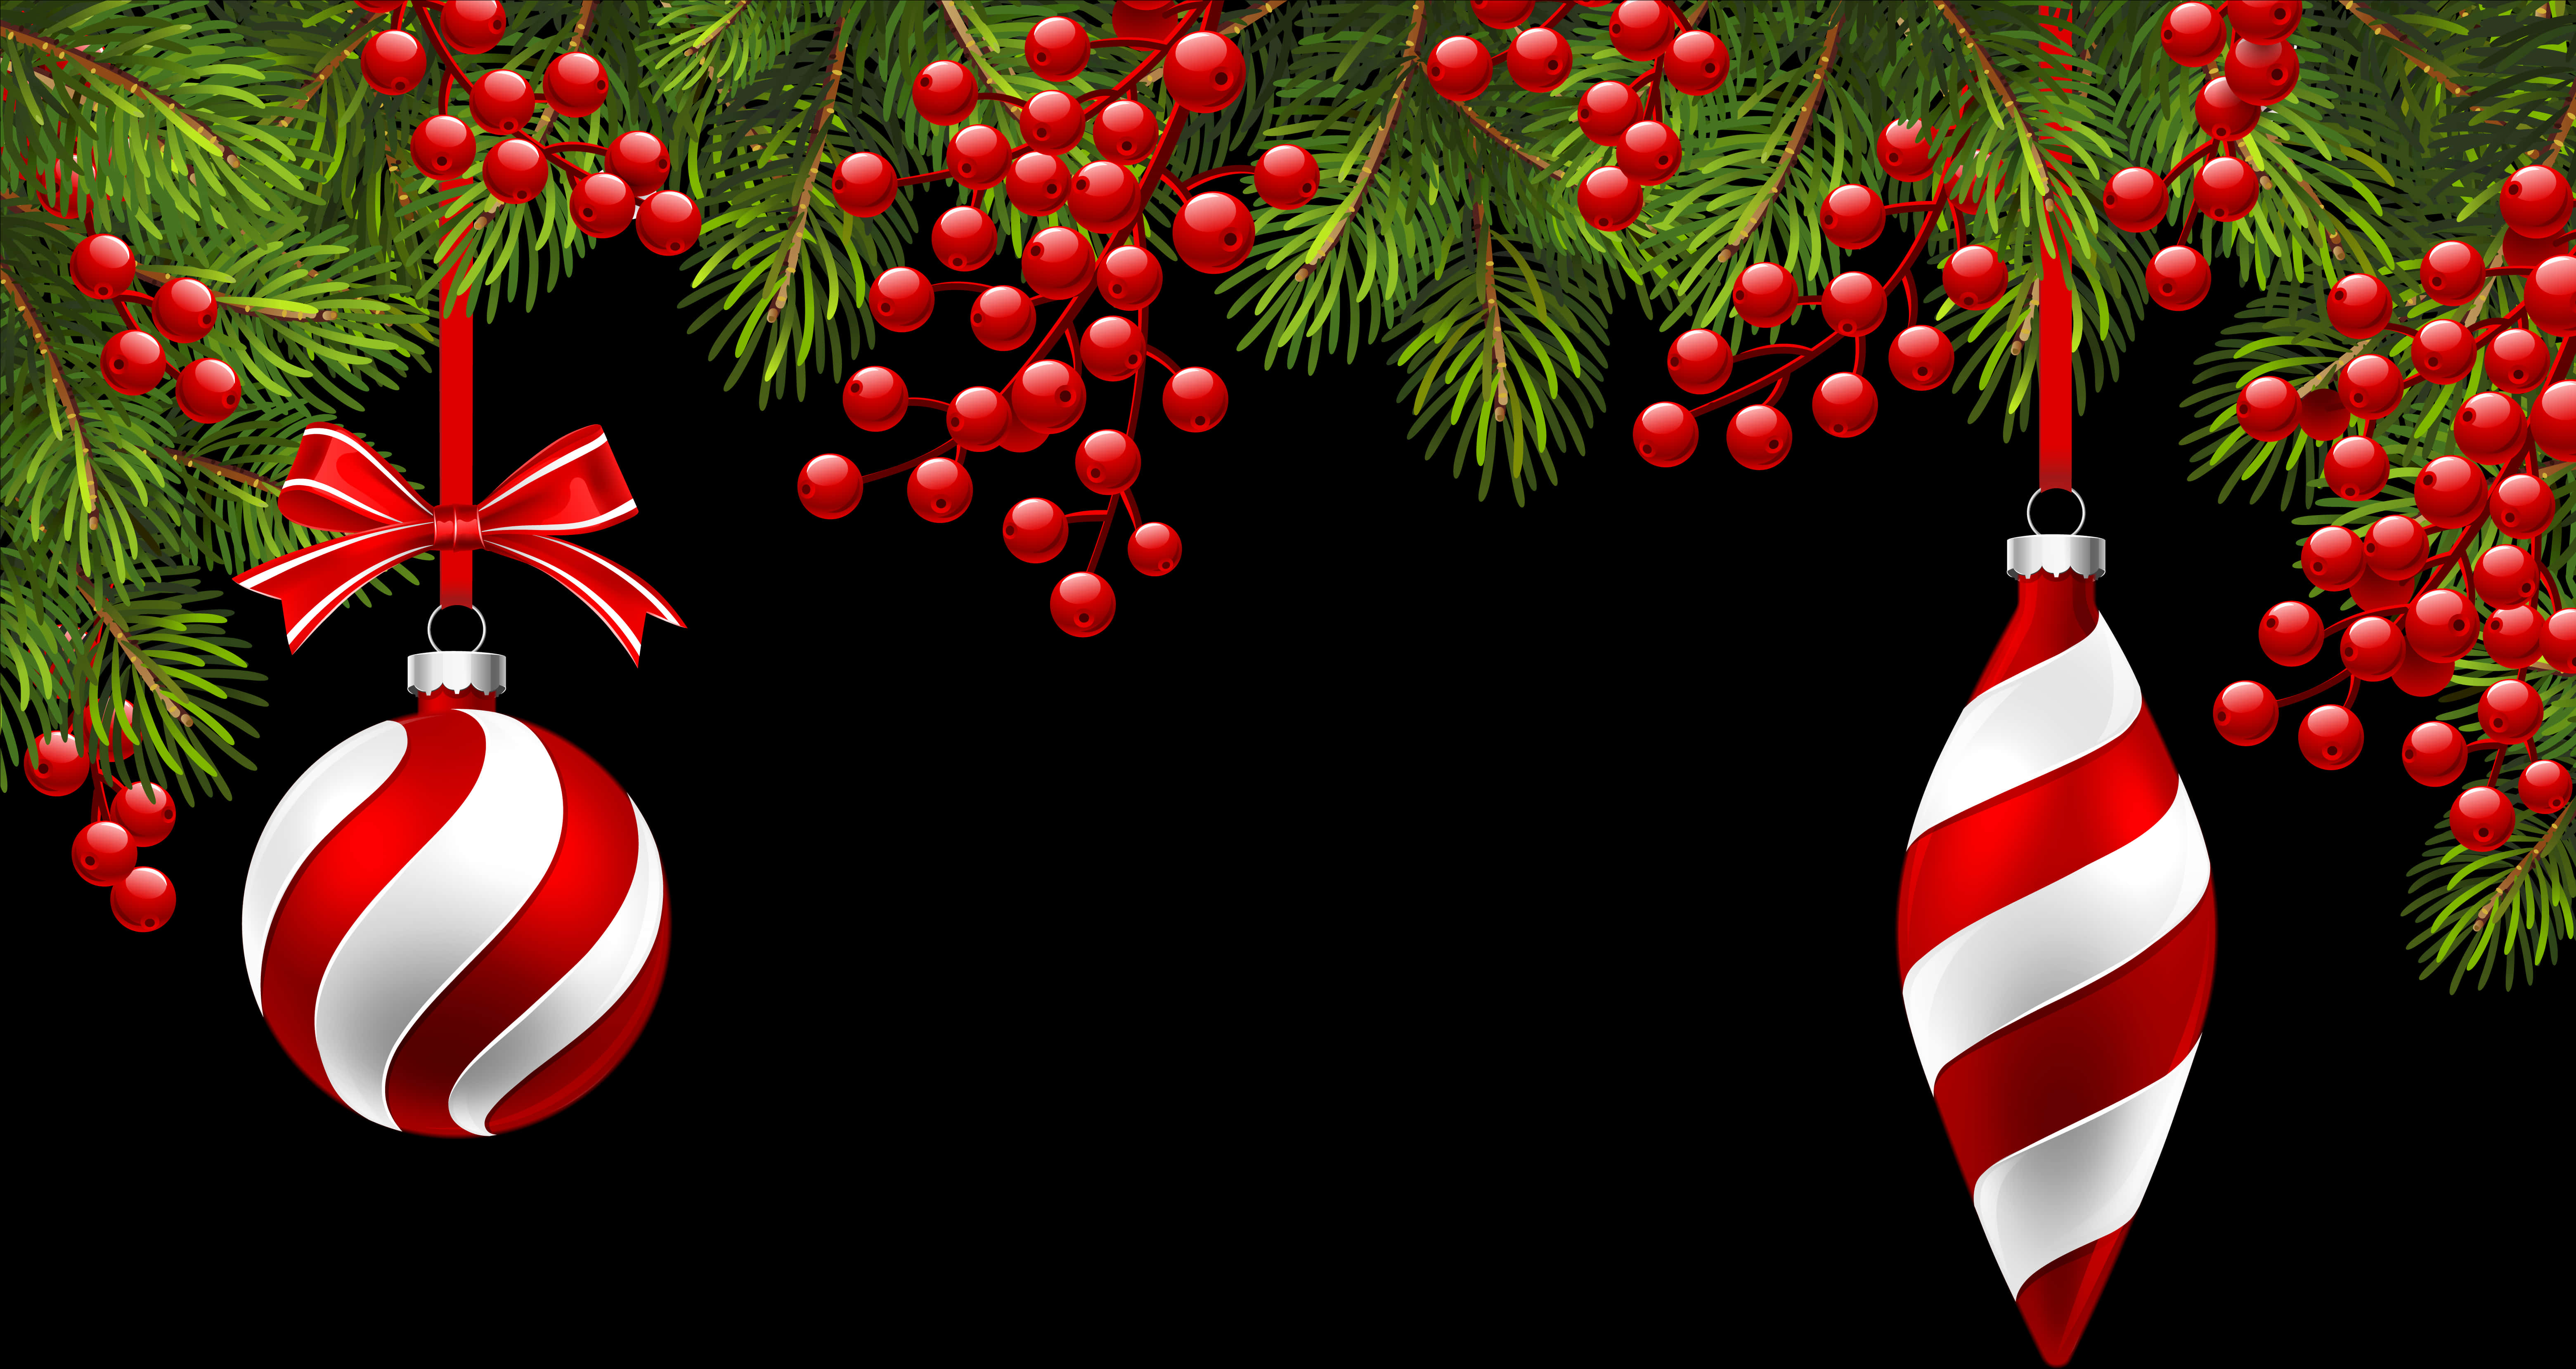 Christmas Ornamentsand Berries PNG image